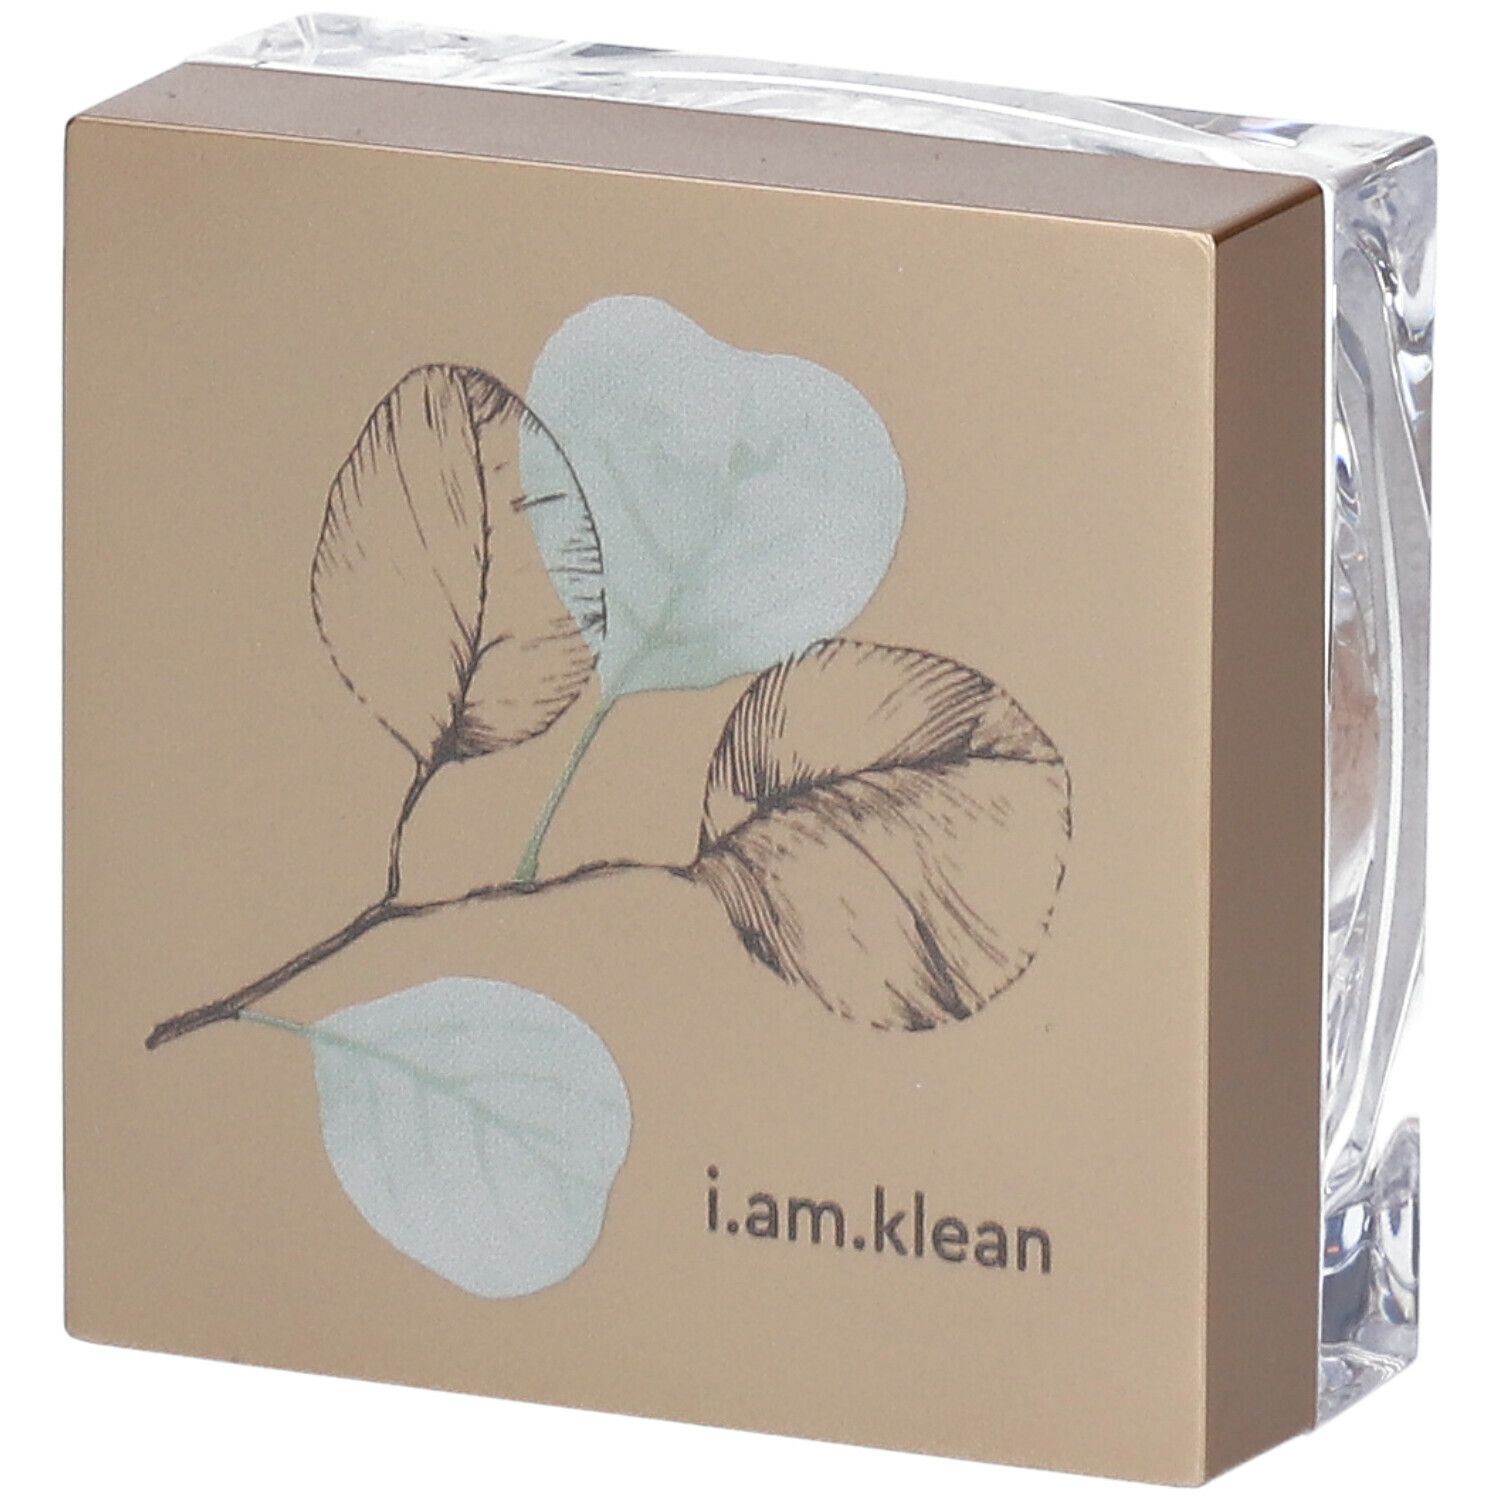 i.am.klean Loose Mineral Foundation Proud pink 3